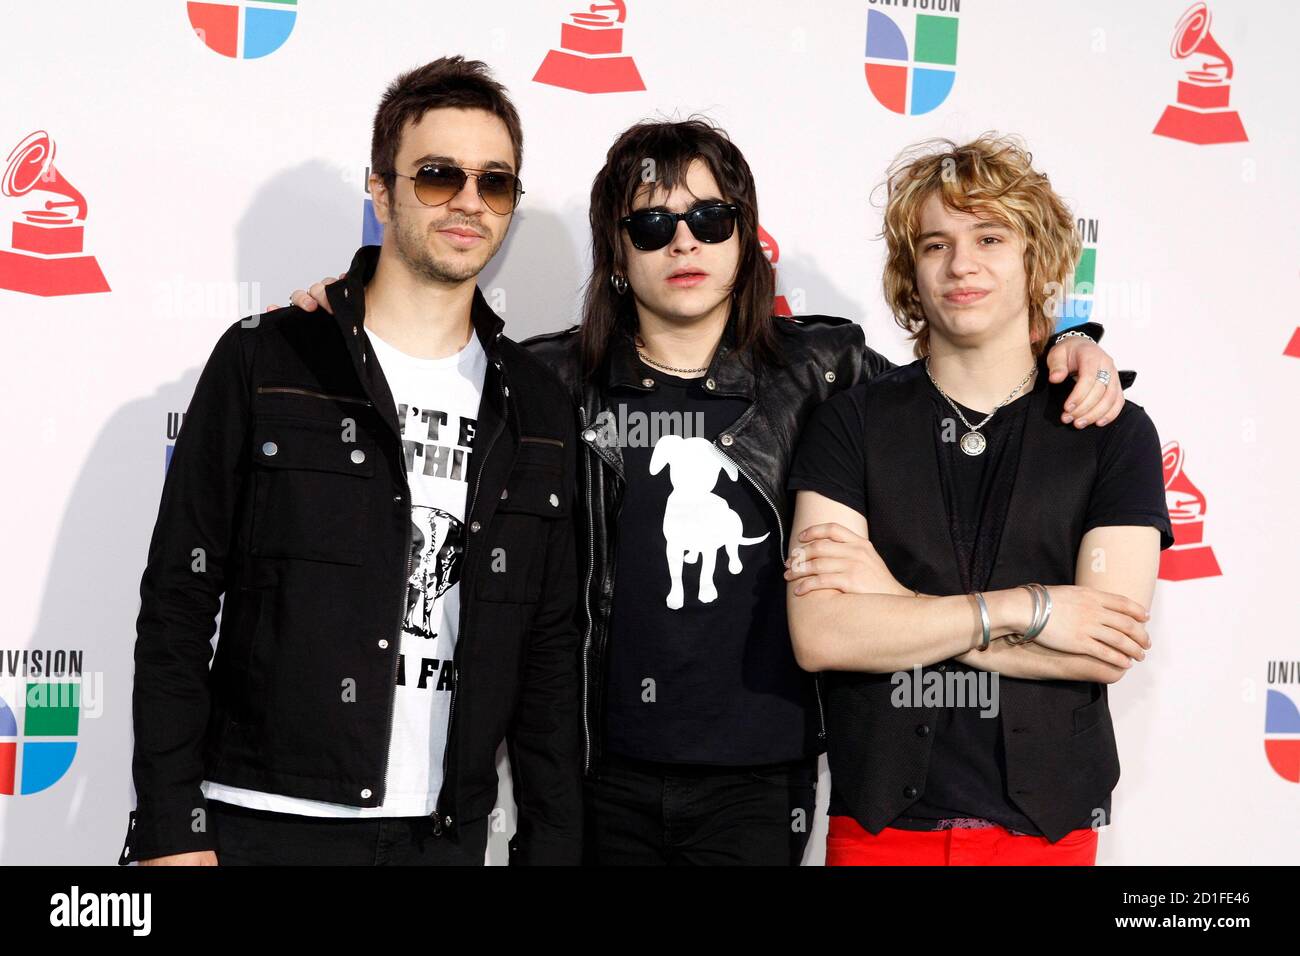 Norwegian music group Air Bag pose as they arrive at the 10th annual Latin Grammy awards in Las Vegas, Nevada November 5, 2009.   REUTERS/Steve Marcus (UNITED STATES ENTERTAINMENT) Stock Photo